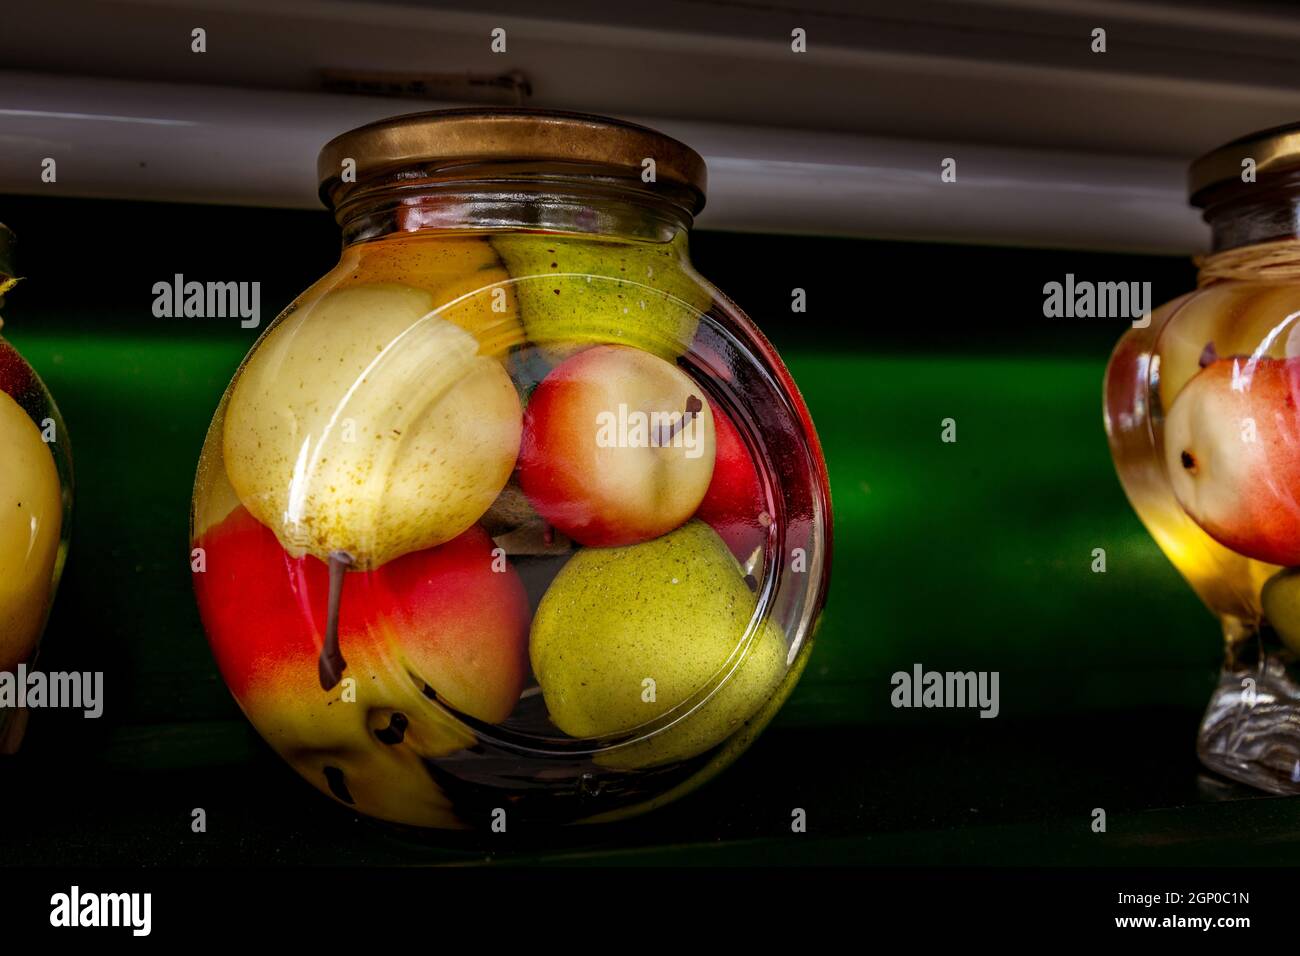 Preserved canned apples and pear in a big glass jar on the shelf Stock Photo